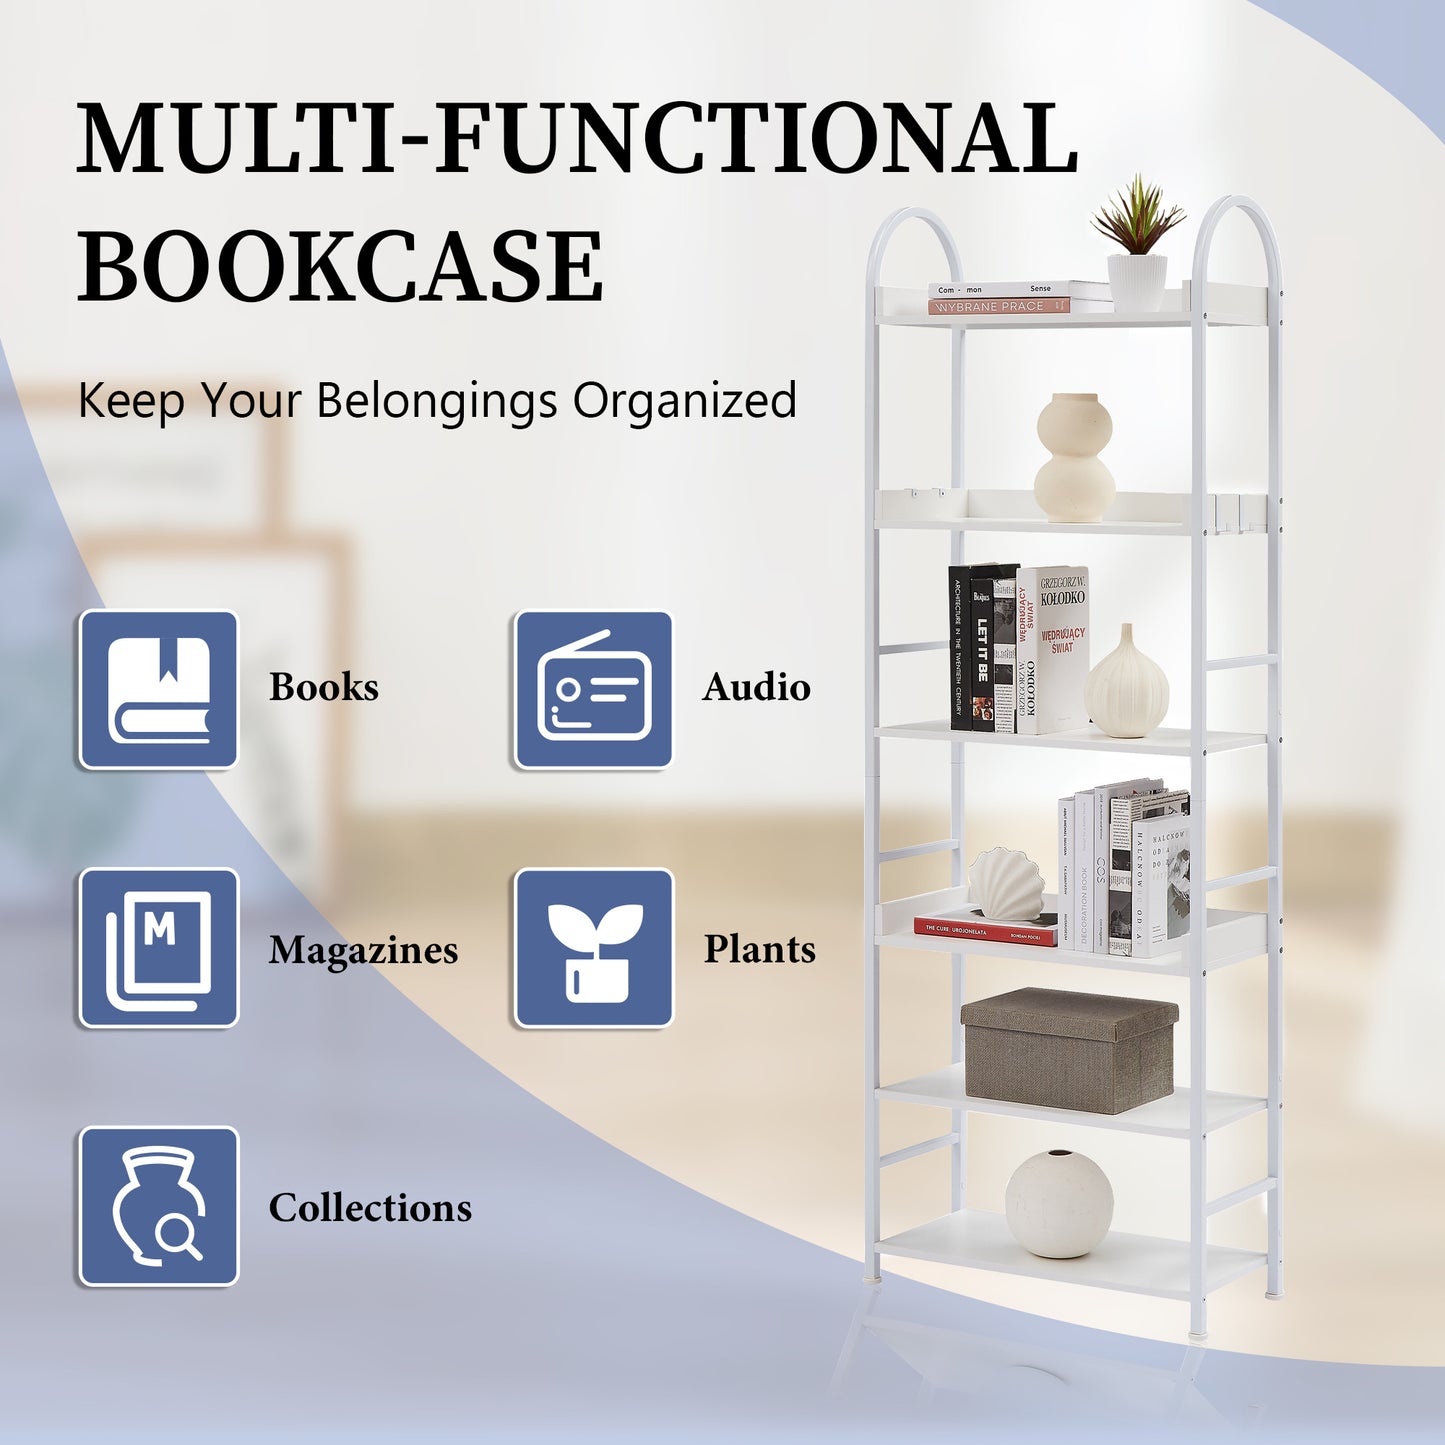 70.8 Inch Tall Bookshelf, 6-tier Shelves with Round Top Frame, MDF Boards, Adjustable Foot Pads, White